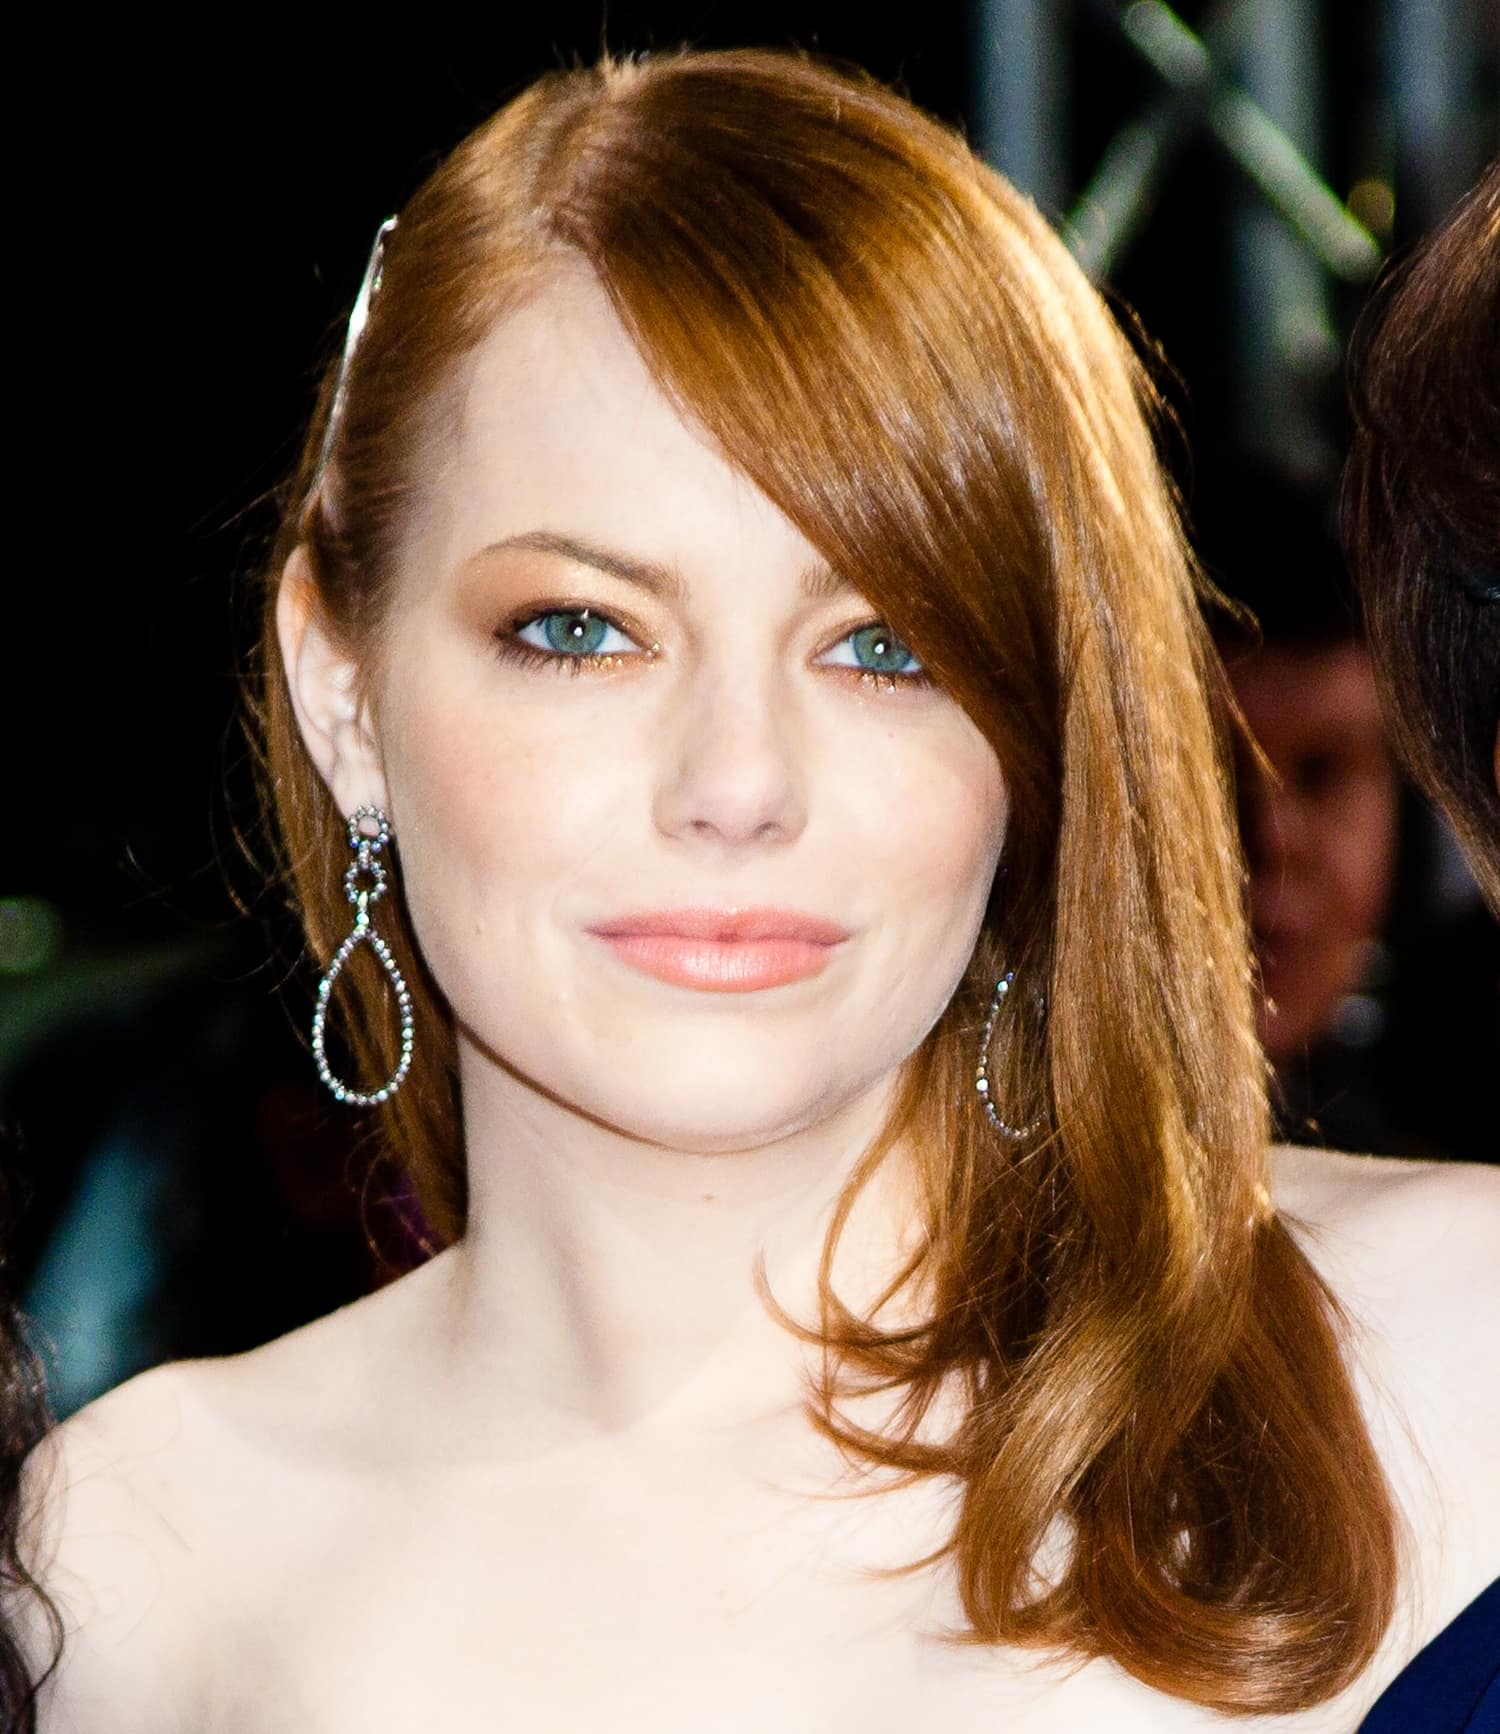 Emma Stone in a strapless Lanvin gown with a flawless hairstyle to show off her Dana Rebecca earrings at the premiere of The Help